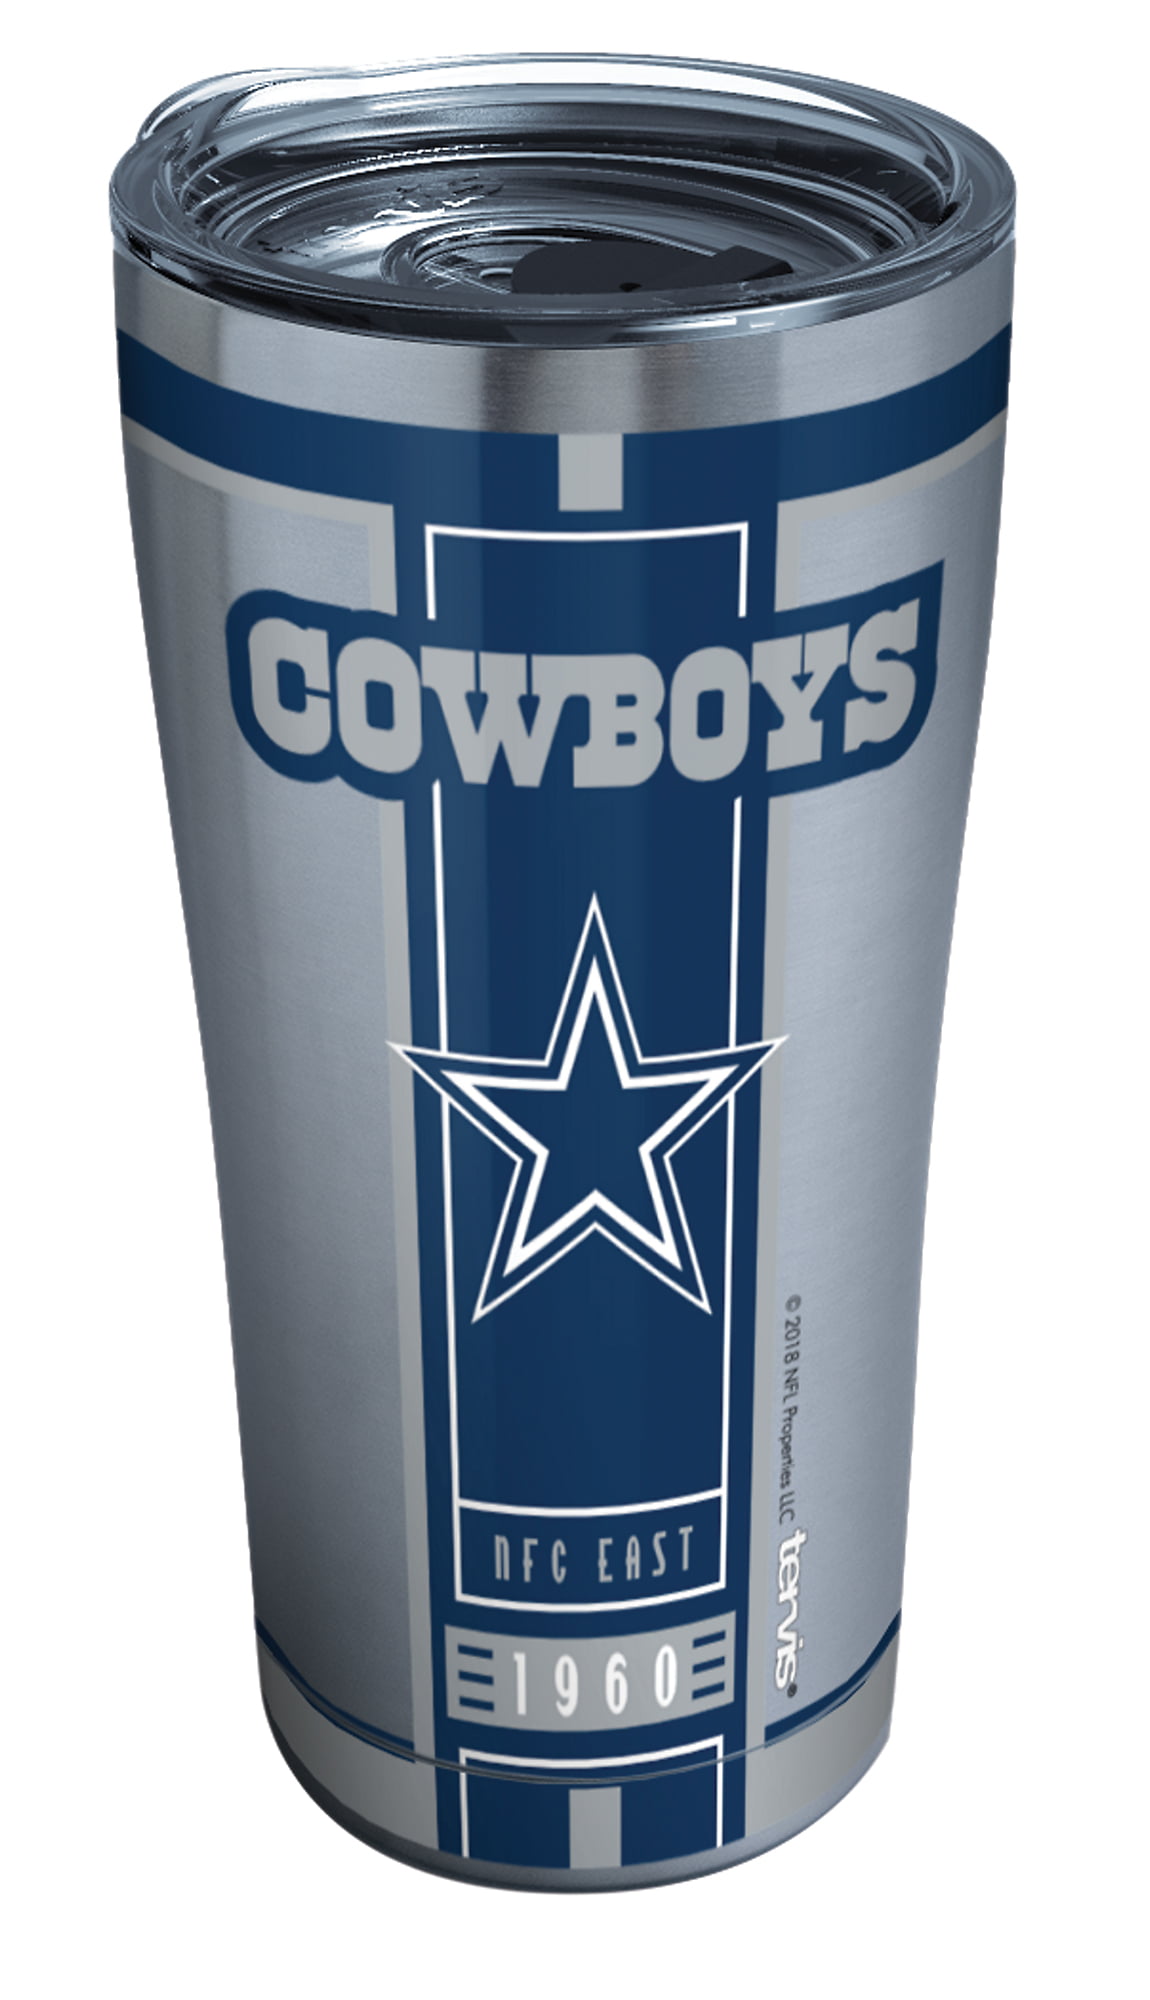 Tervis Made in USA Double Walled NFL Dallas Cowboys Primary Logo Insulated  Tumbler Cup Keeps Drinks Cold & Hot, 24oz, Navy Lid